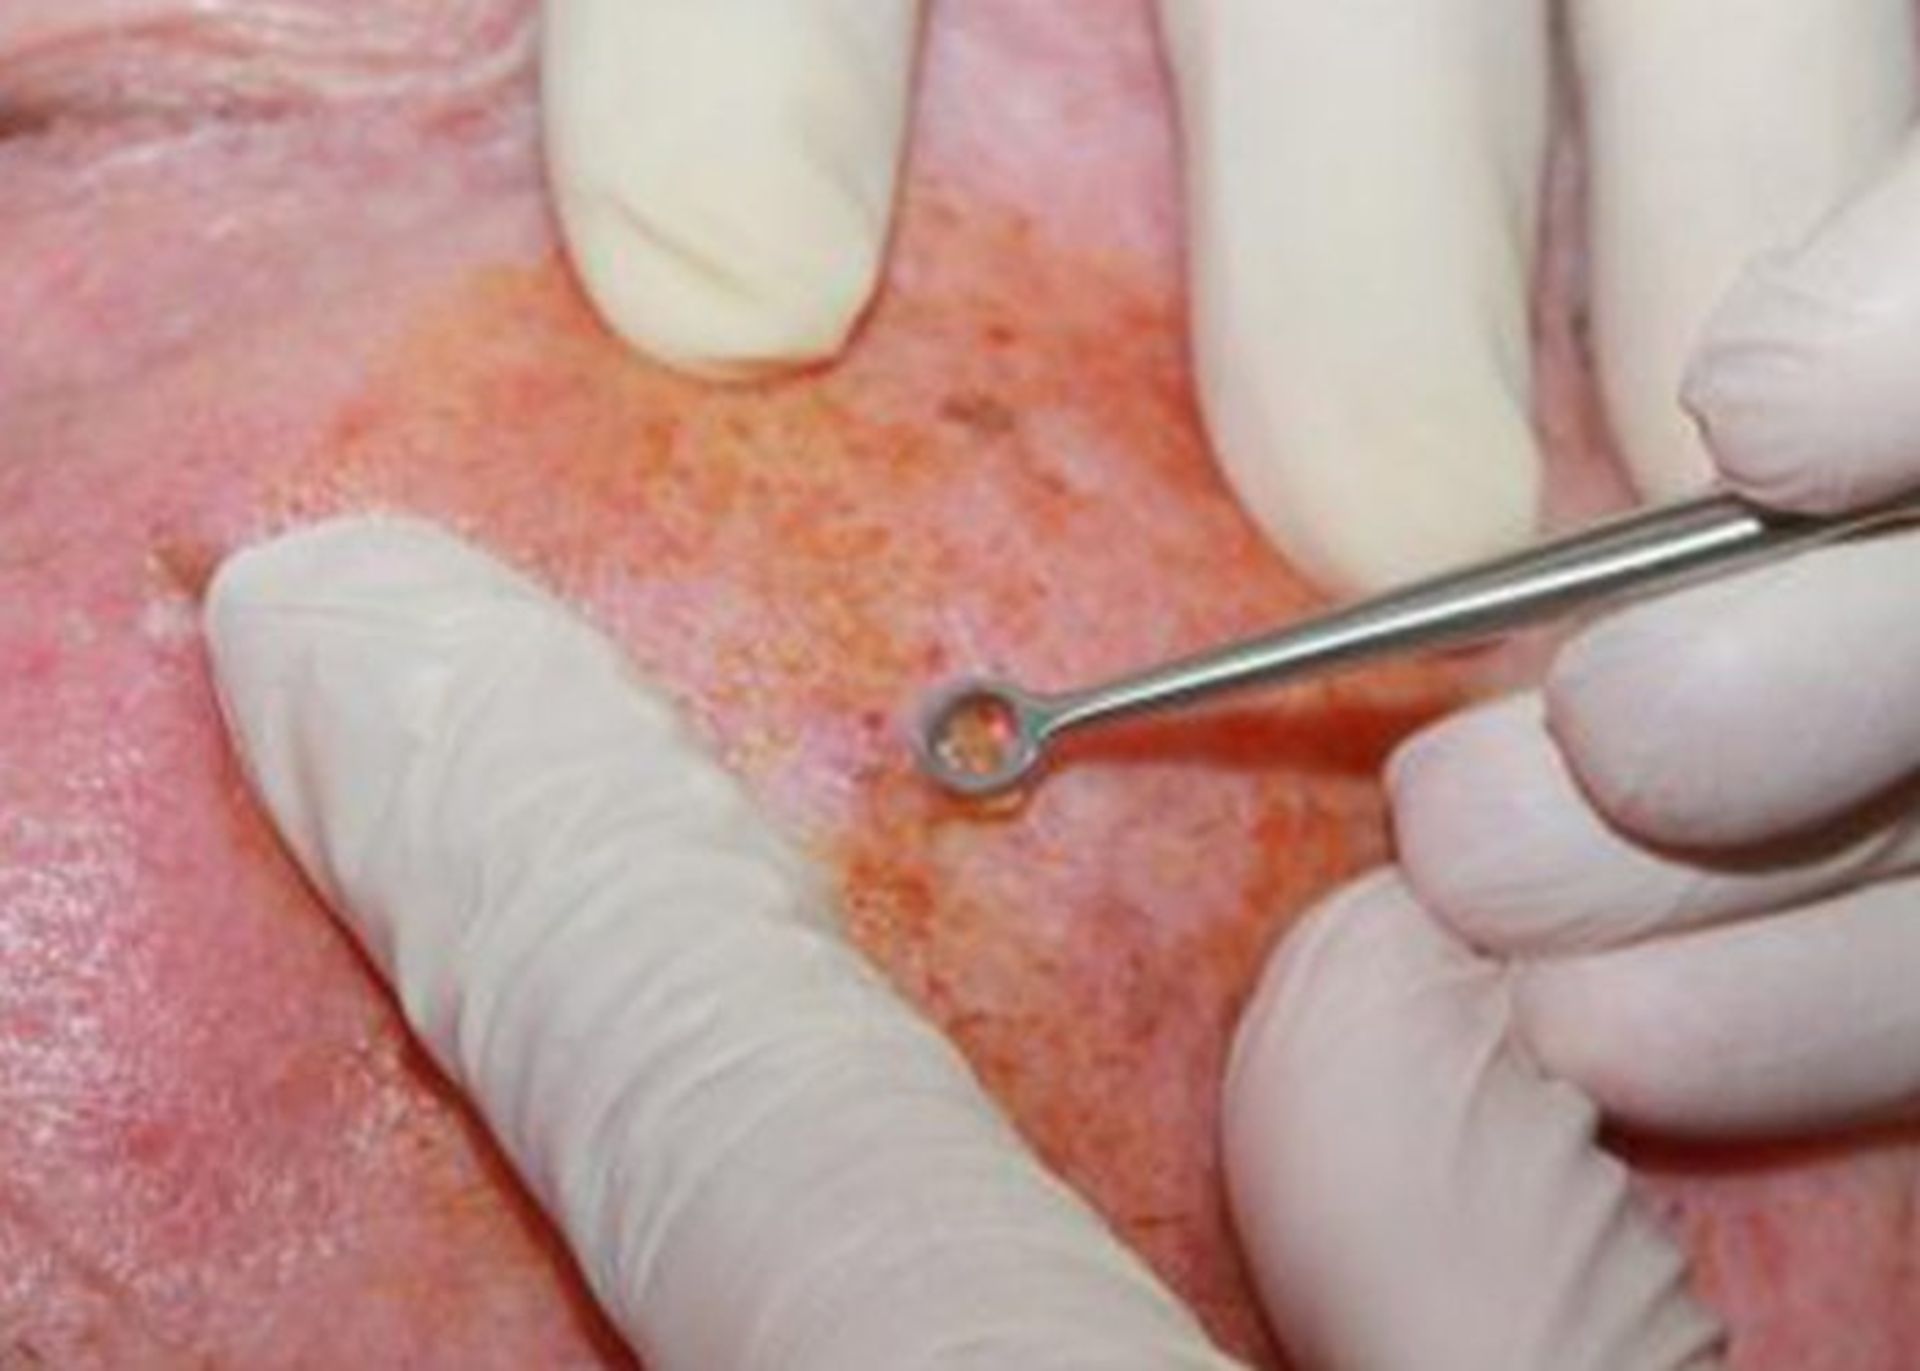 Removal of cancerous tissue